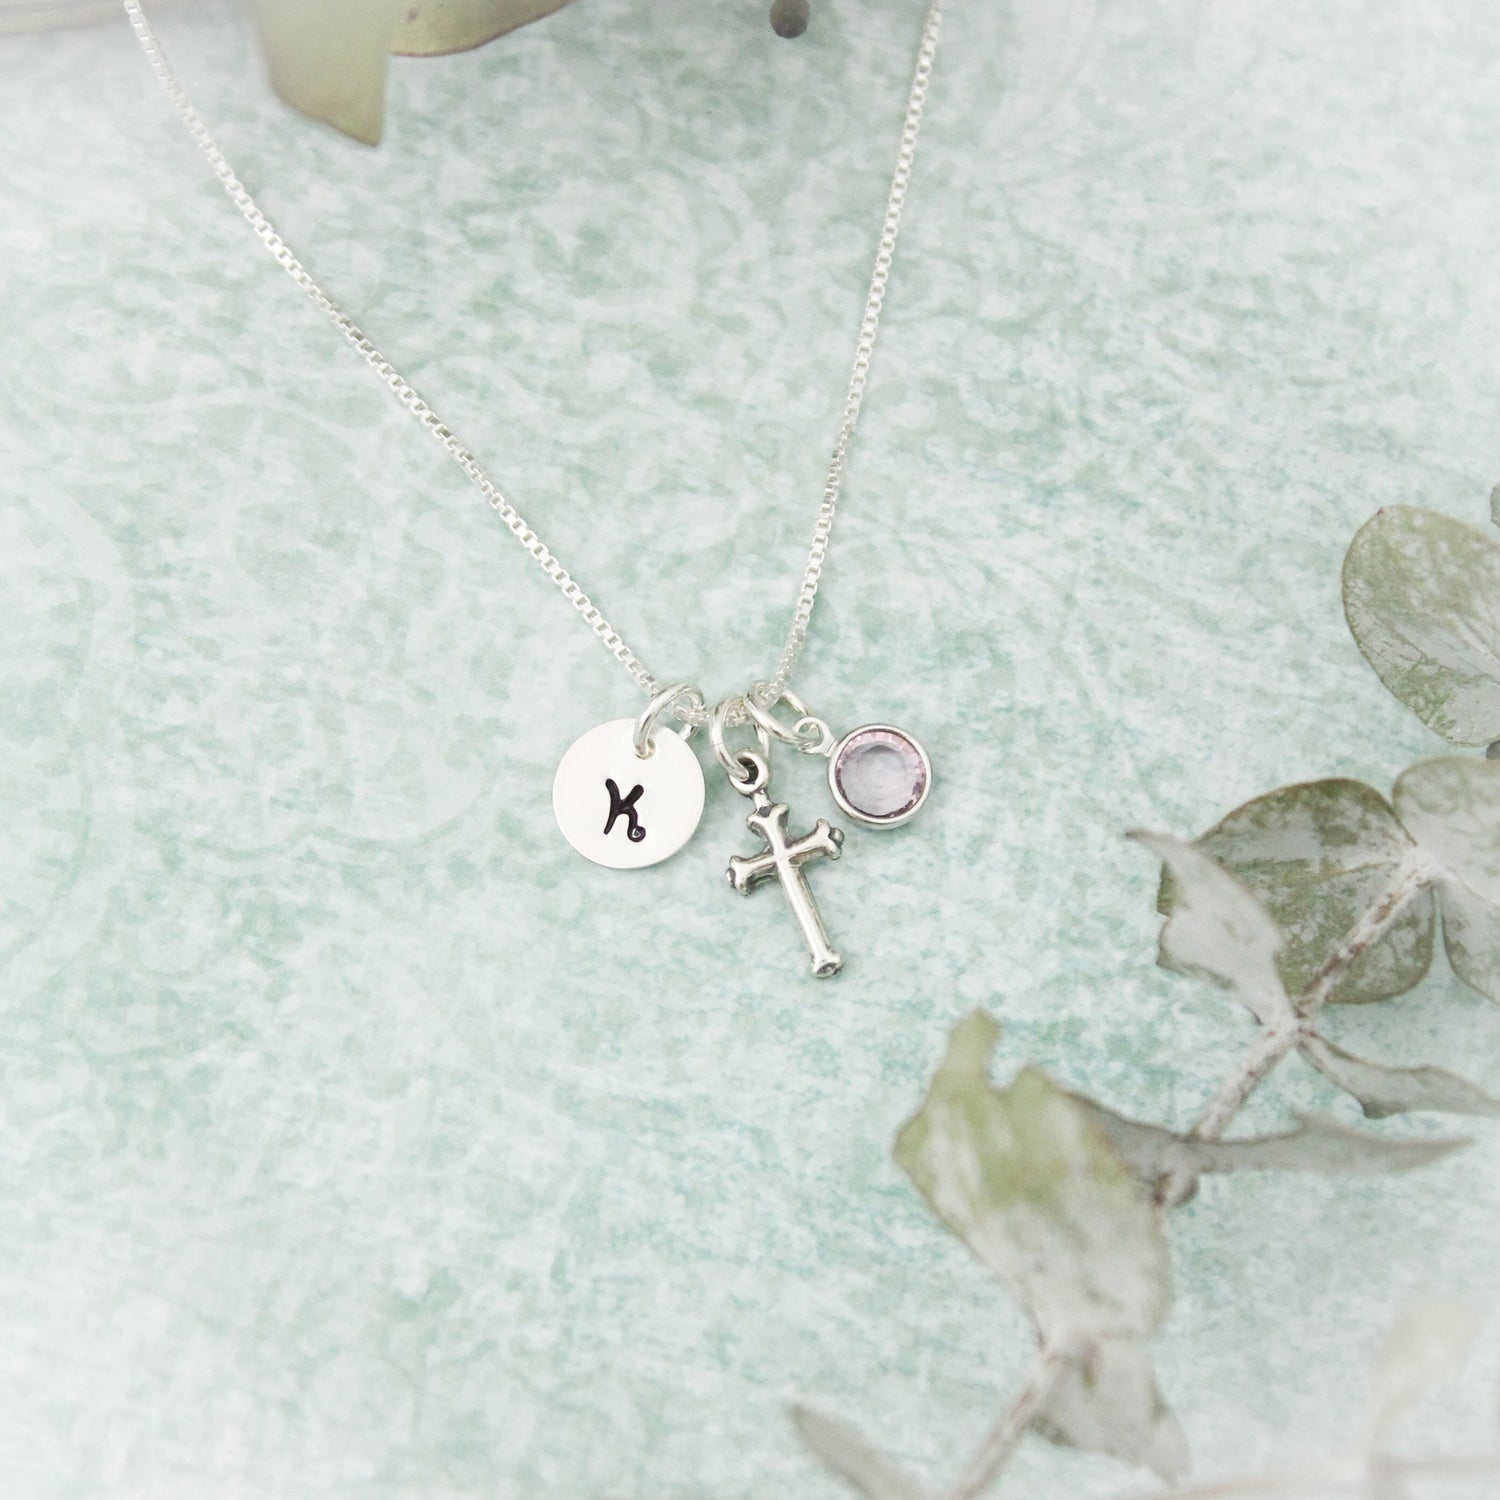 Cross Charm Necklace, Confirmation Cross Necklace, First Communion Cross Necklace, Personalized Hand Stamped Jewelry